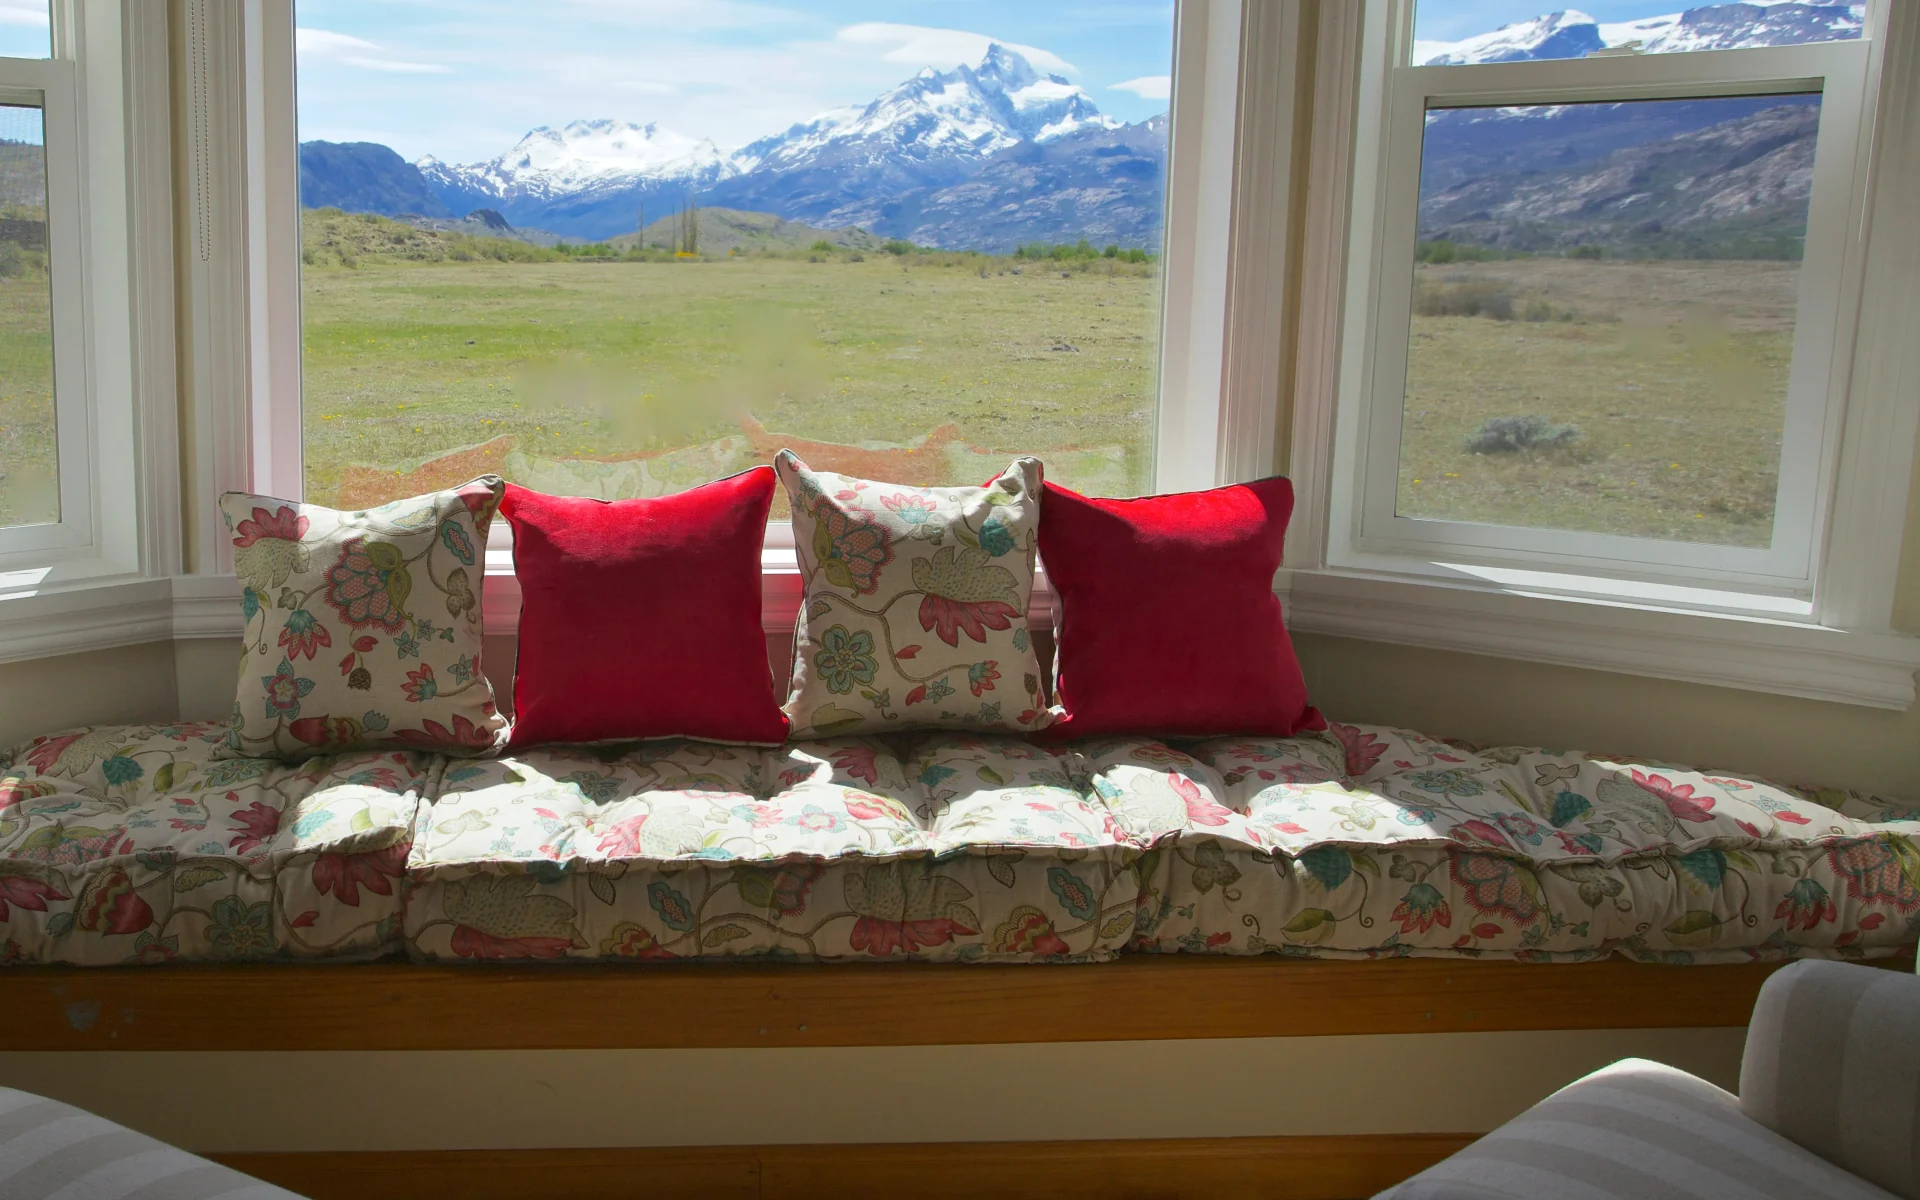 A window seat in one of the bungalows looks out to a magnificent view of the Patagonian Andes.